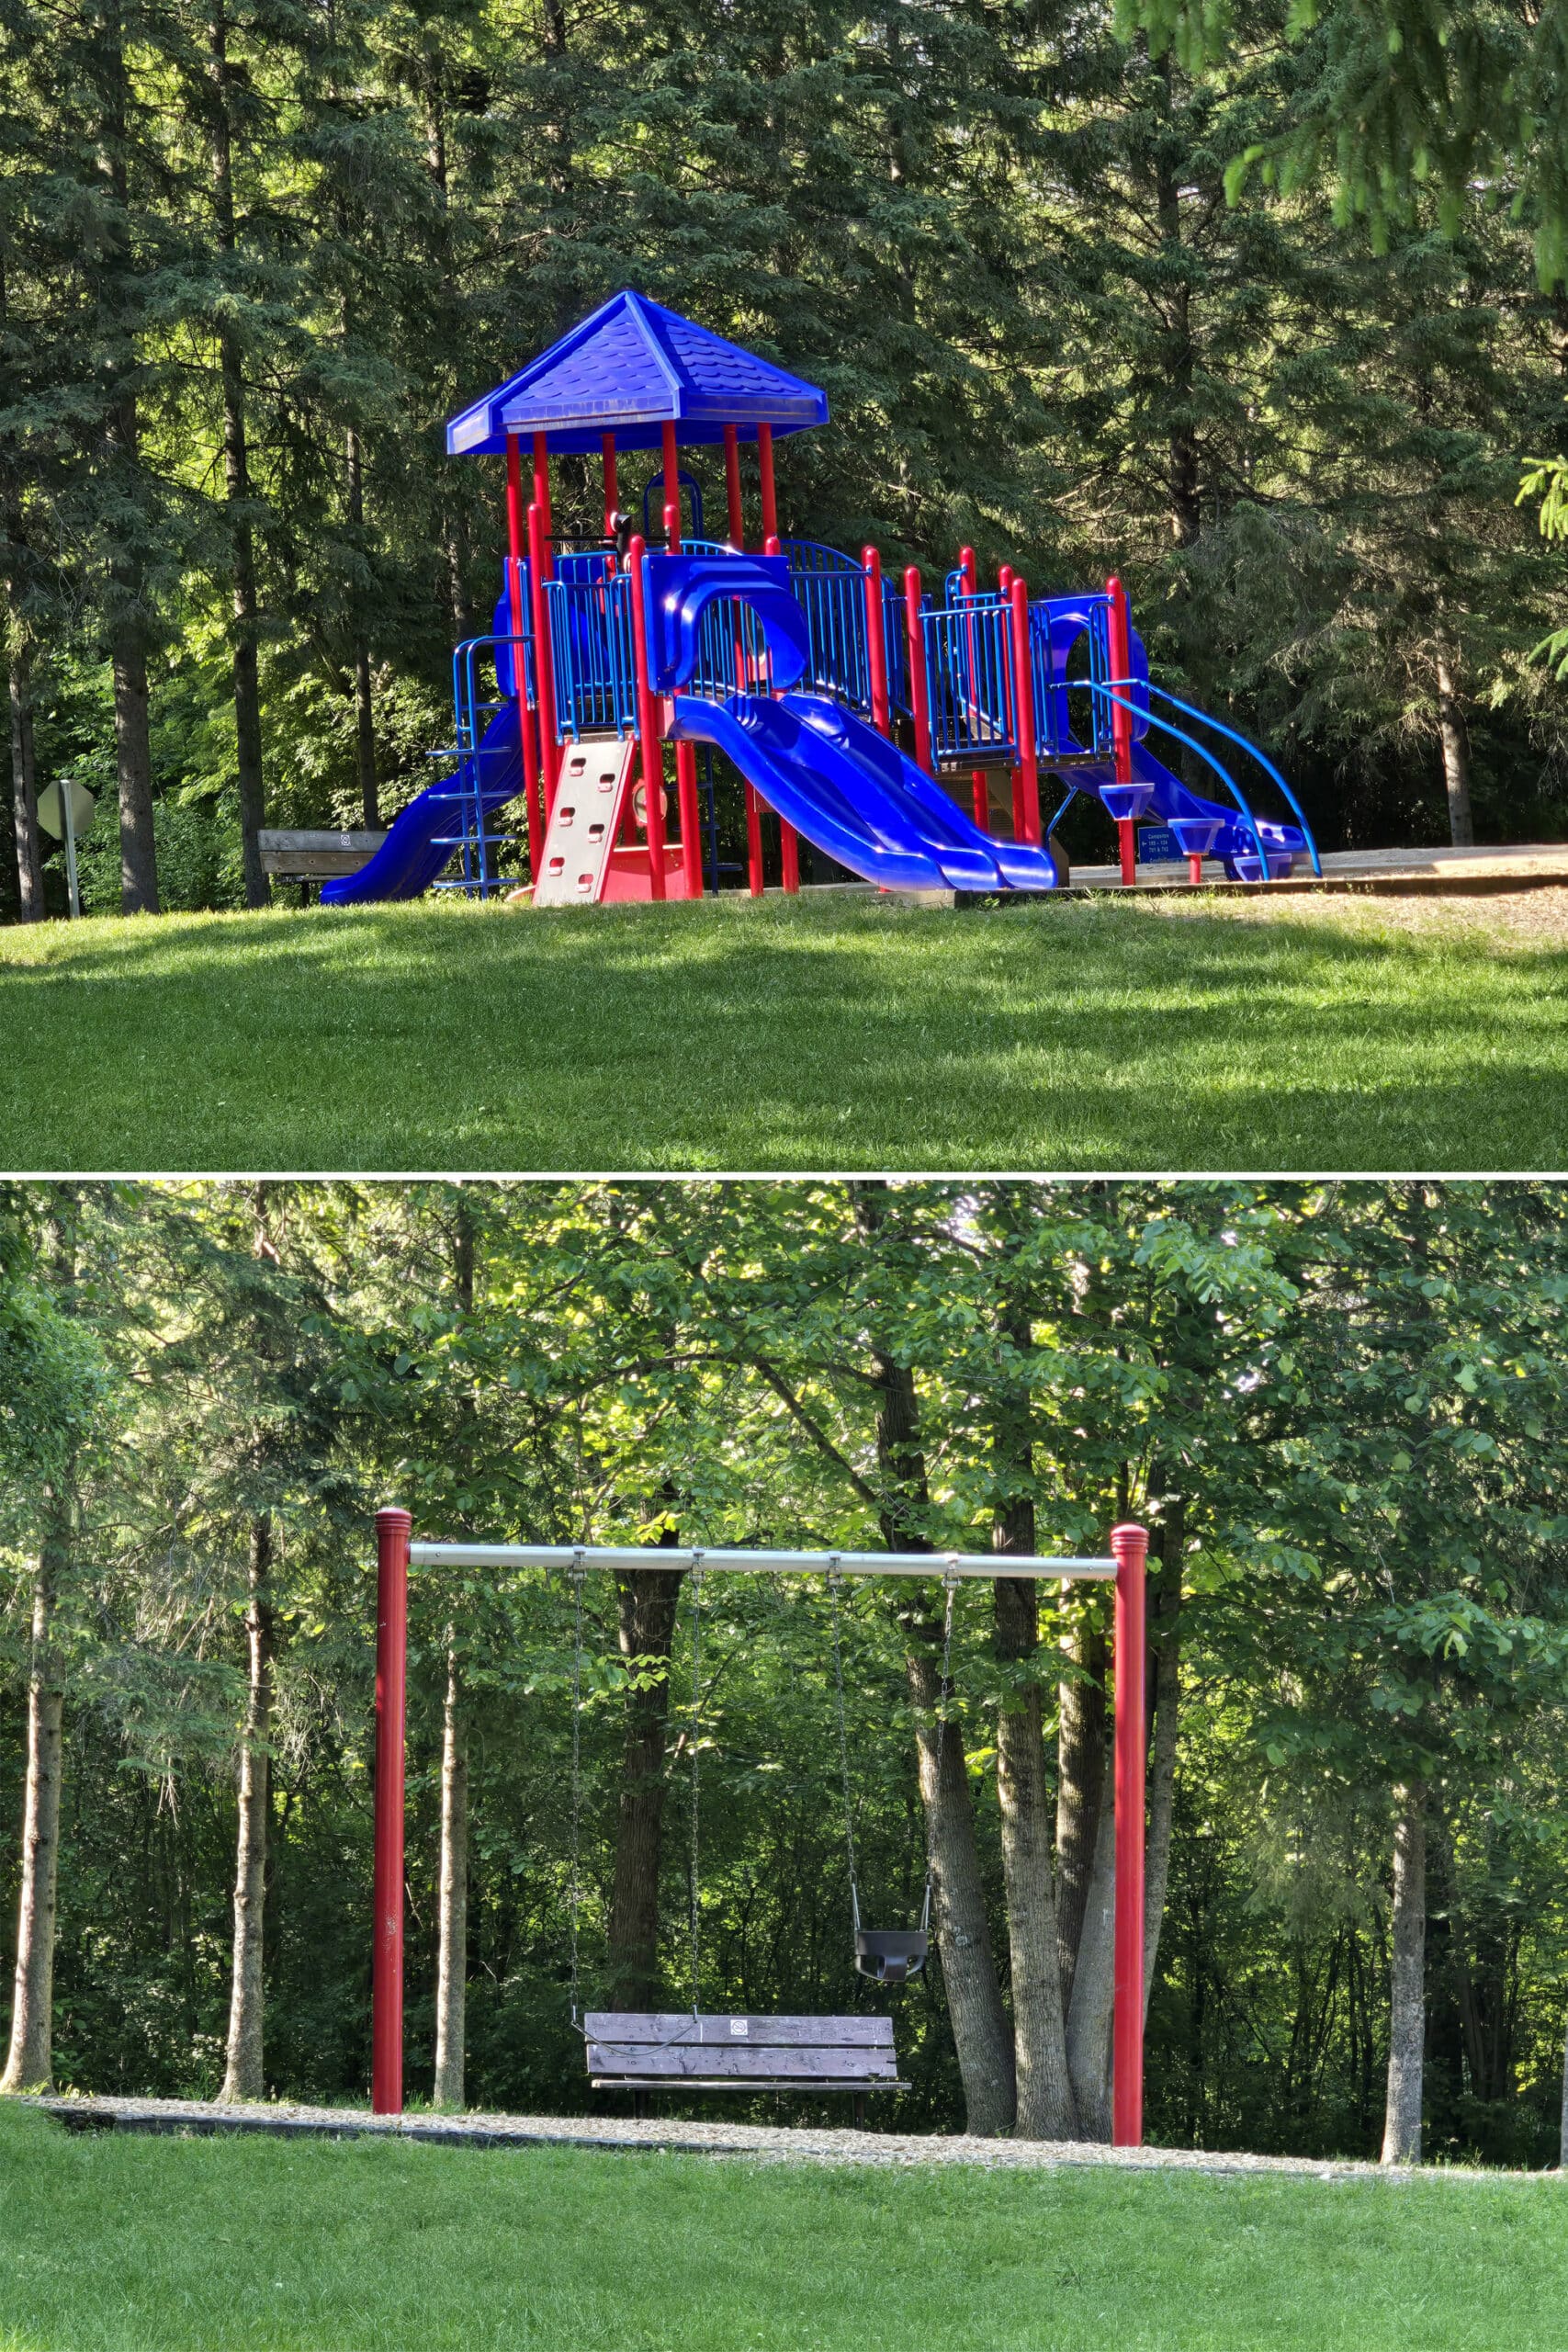 2 part image showing a large modern playground in blue and red.